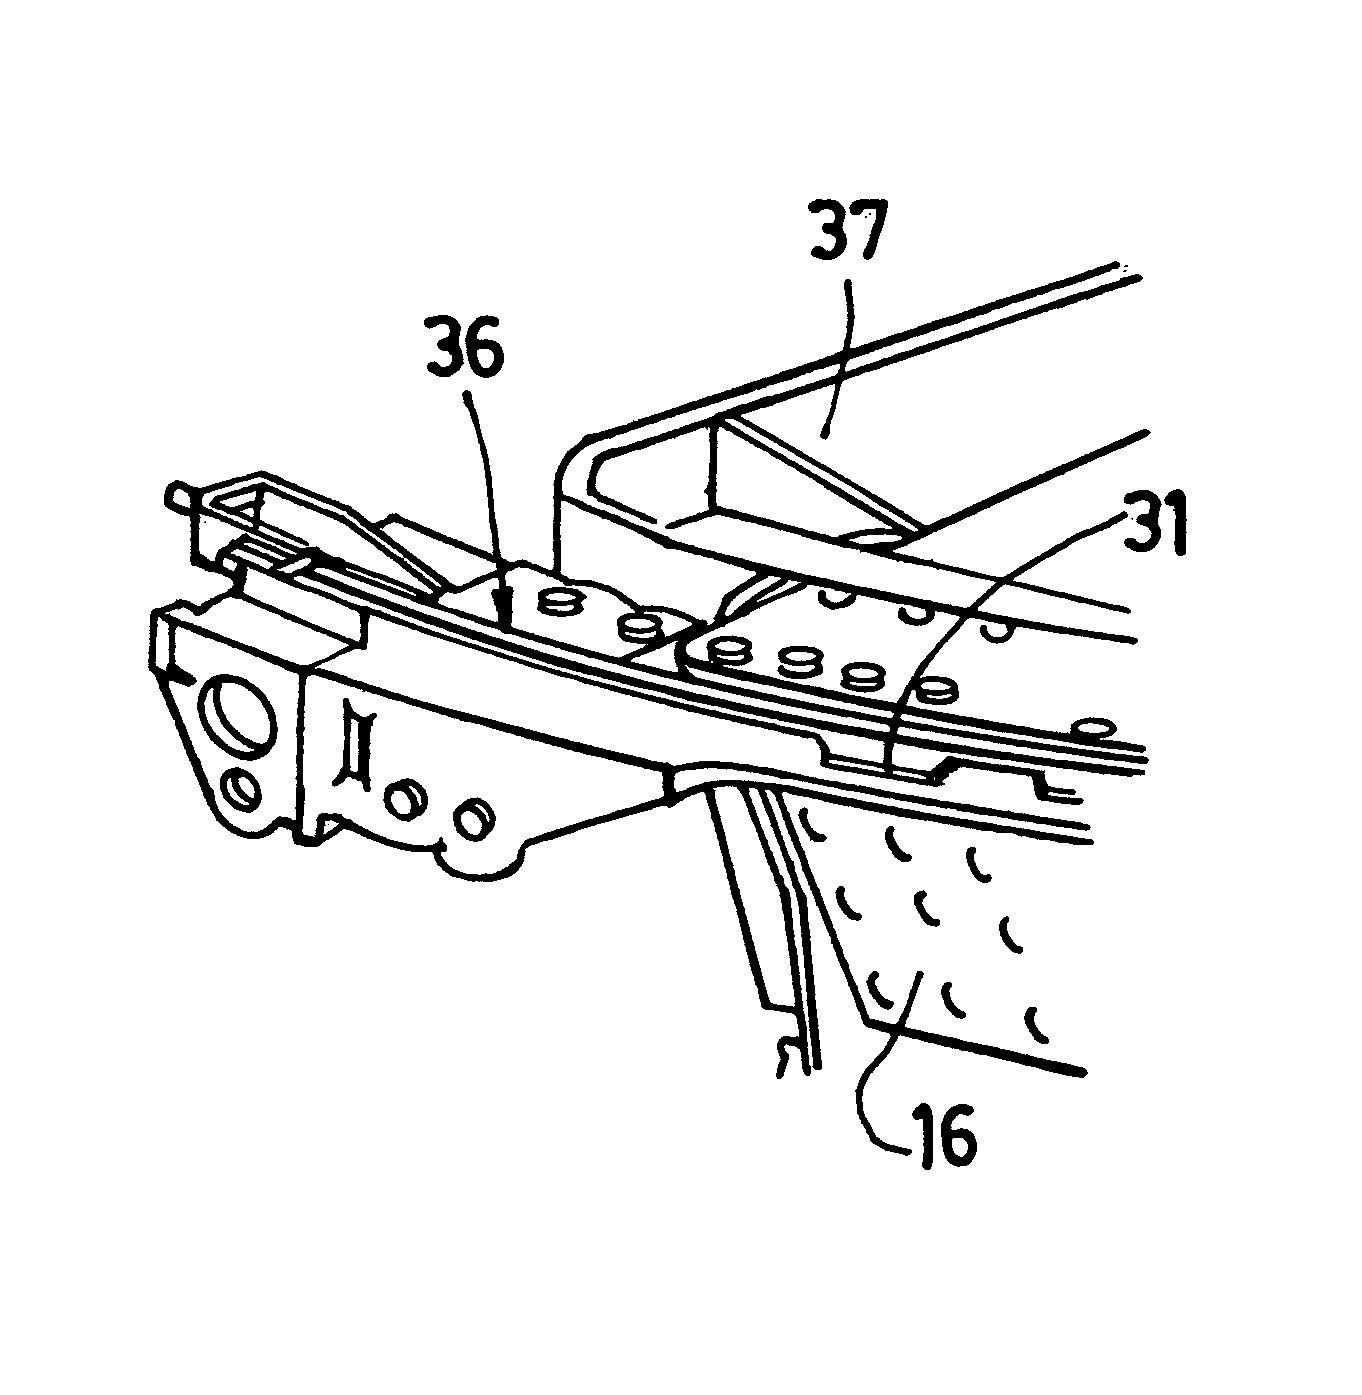 Attachement of a jet engine nacelle structure by means of a reinforced knife-edge/groove coupling